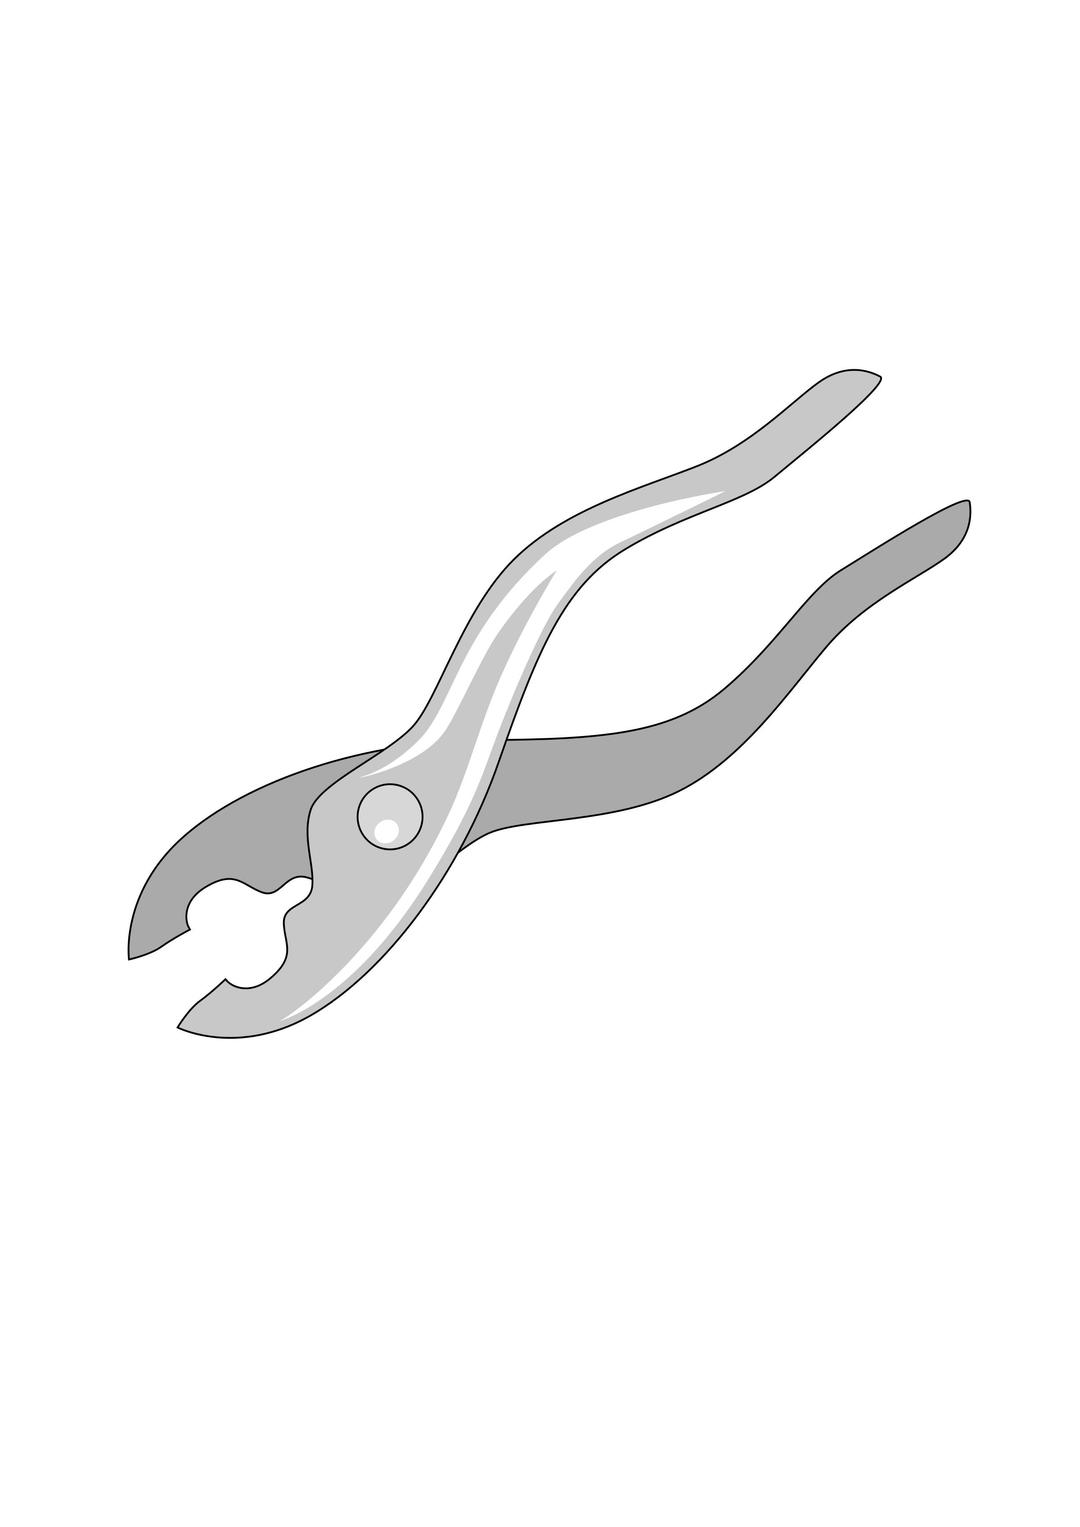 Pliers iss activity sheet p2 png transparent